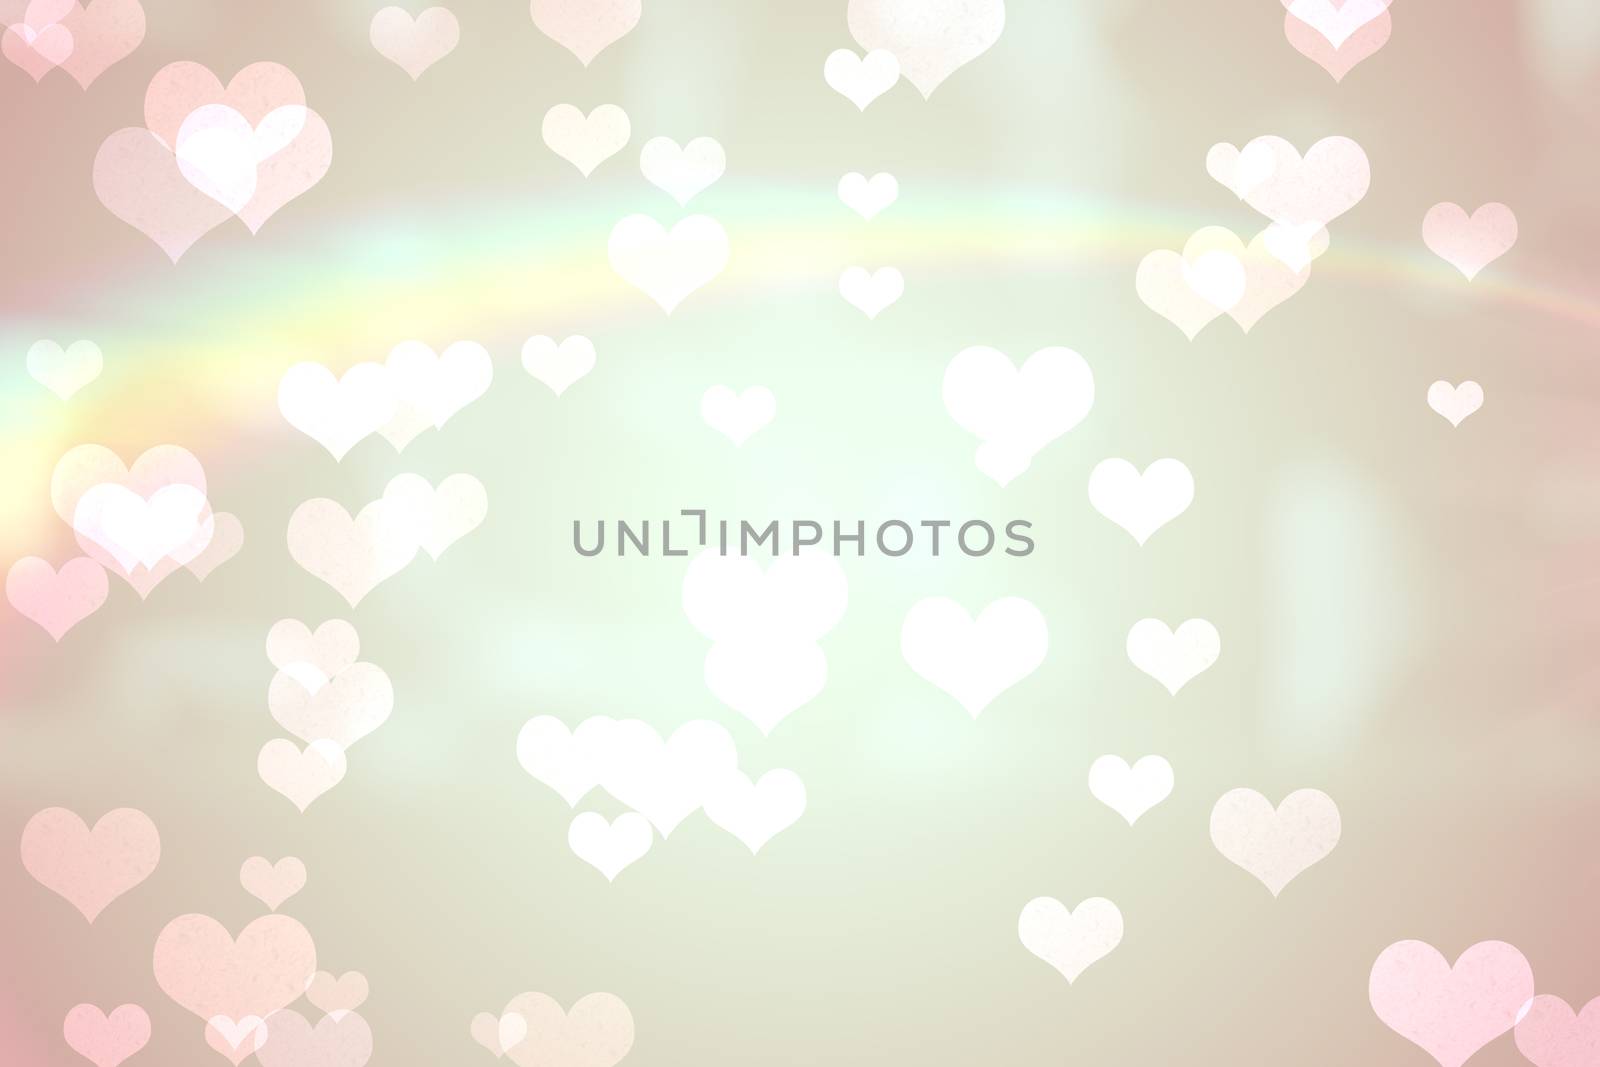 Heart pattern on abstract design with rainbow